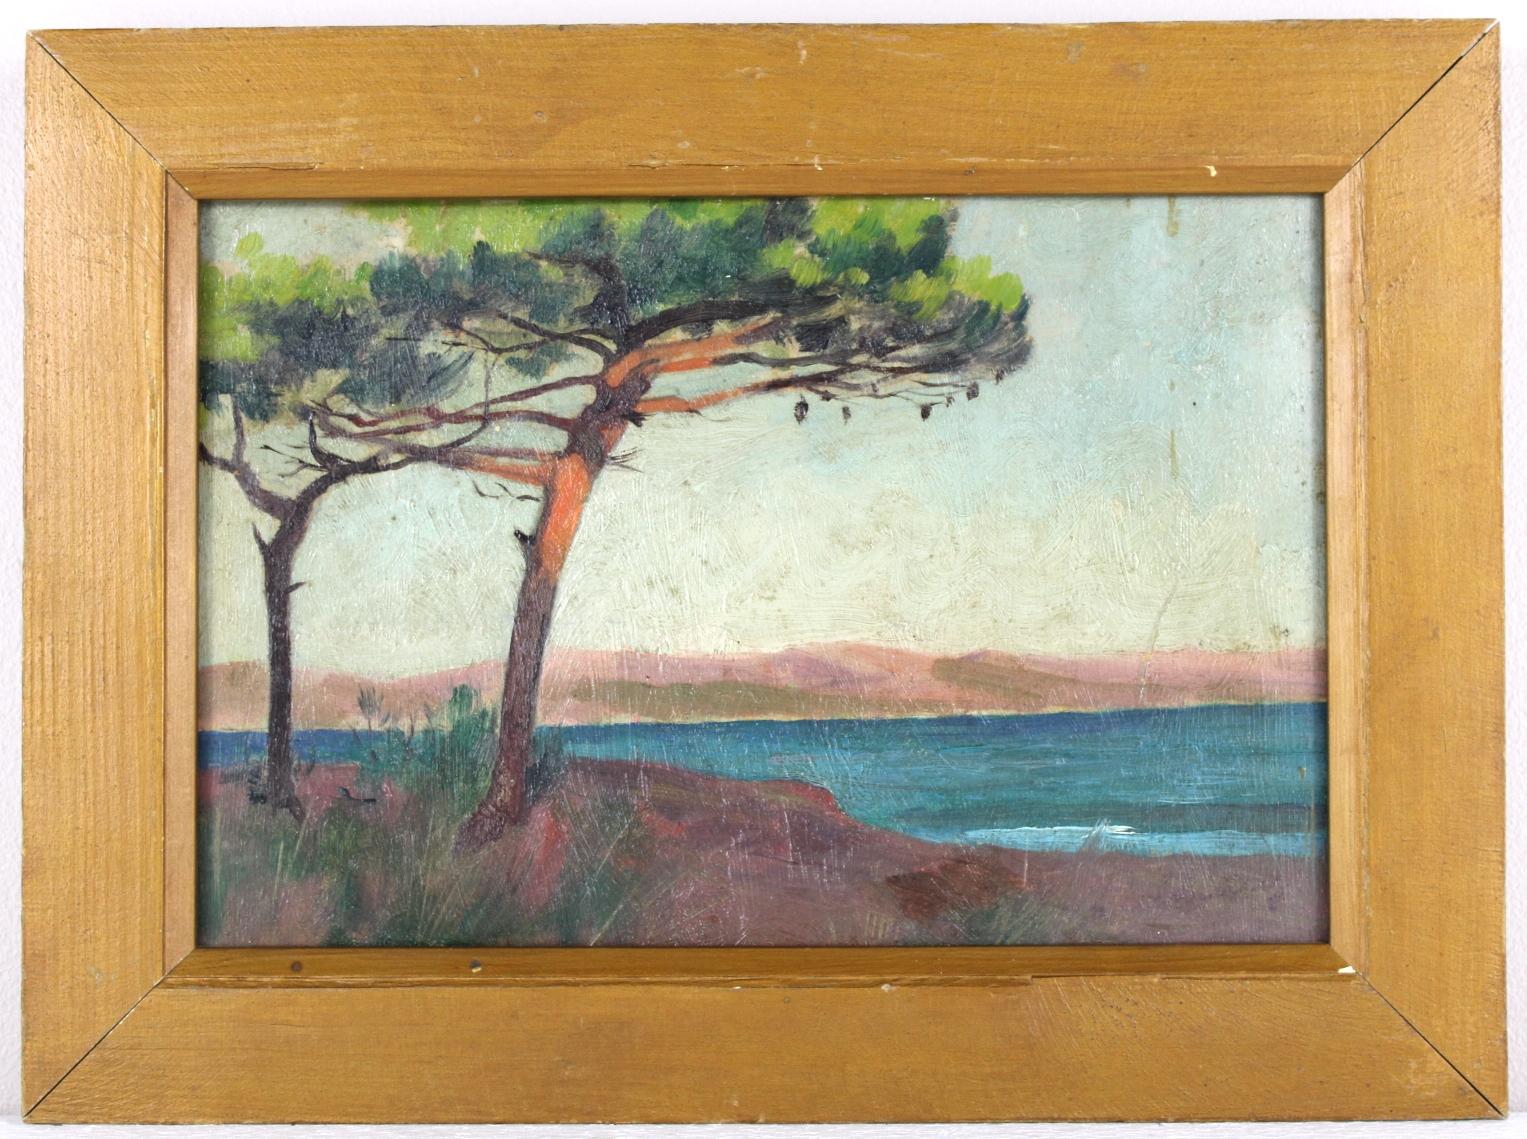 *Dimensions include the frame

This small landscape painting by Émile Louis Thivier (1858-1922) captures a serene natural setting, reminiscent of the atmospheric works of the Impressionist masters. The soft, diffuse brushwork, subtle interplay of